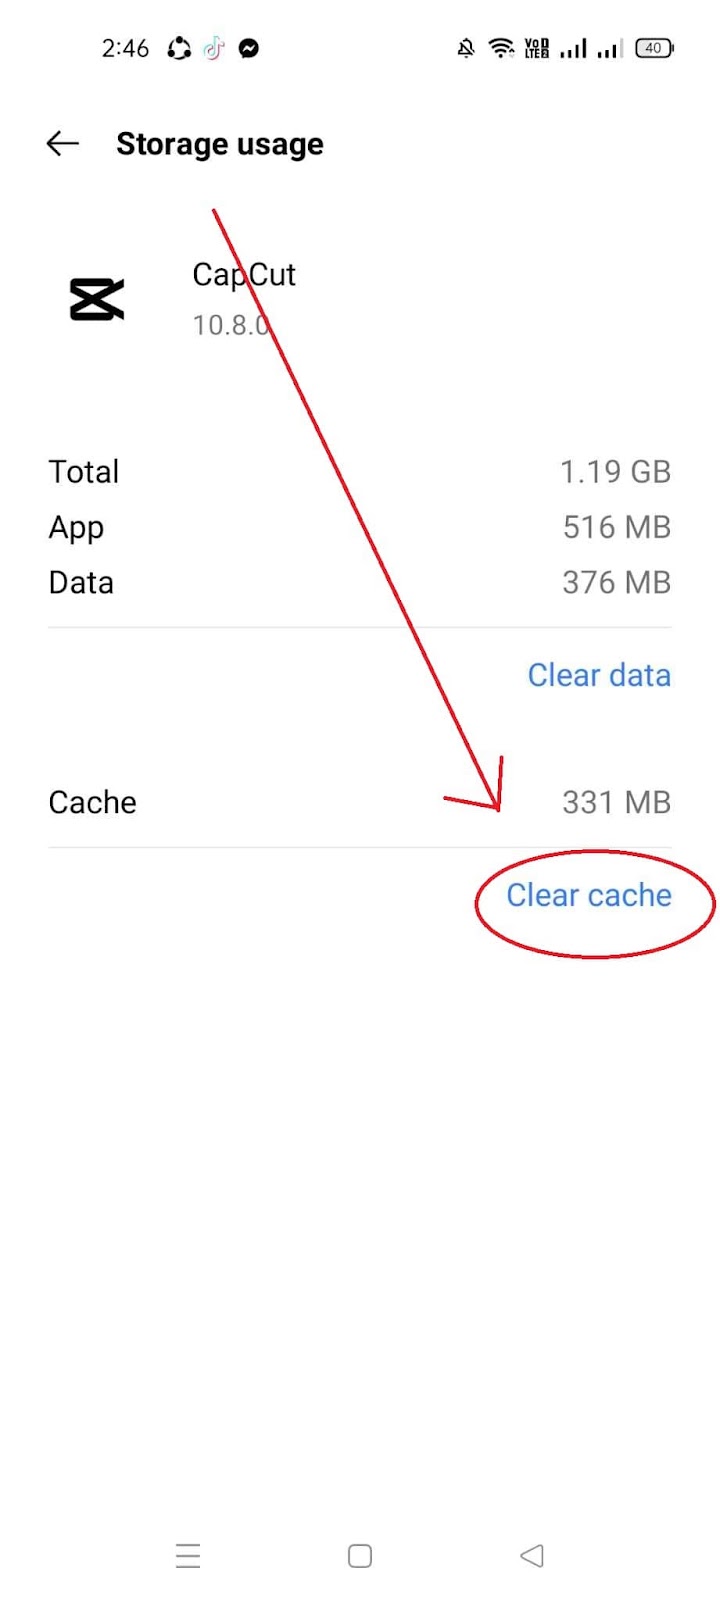 CapCut Export Issues How to Fix - Clear Cache